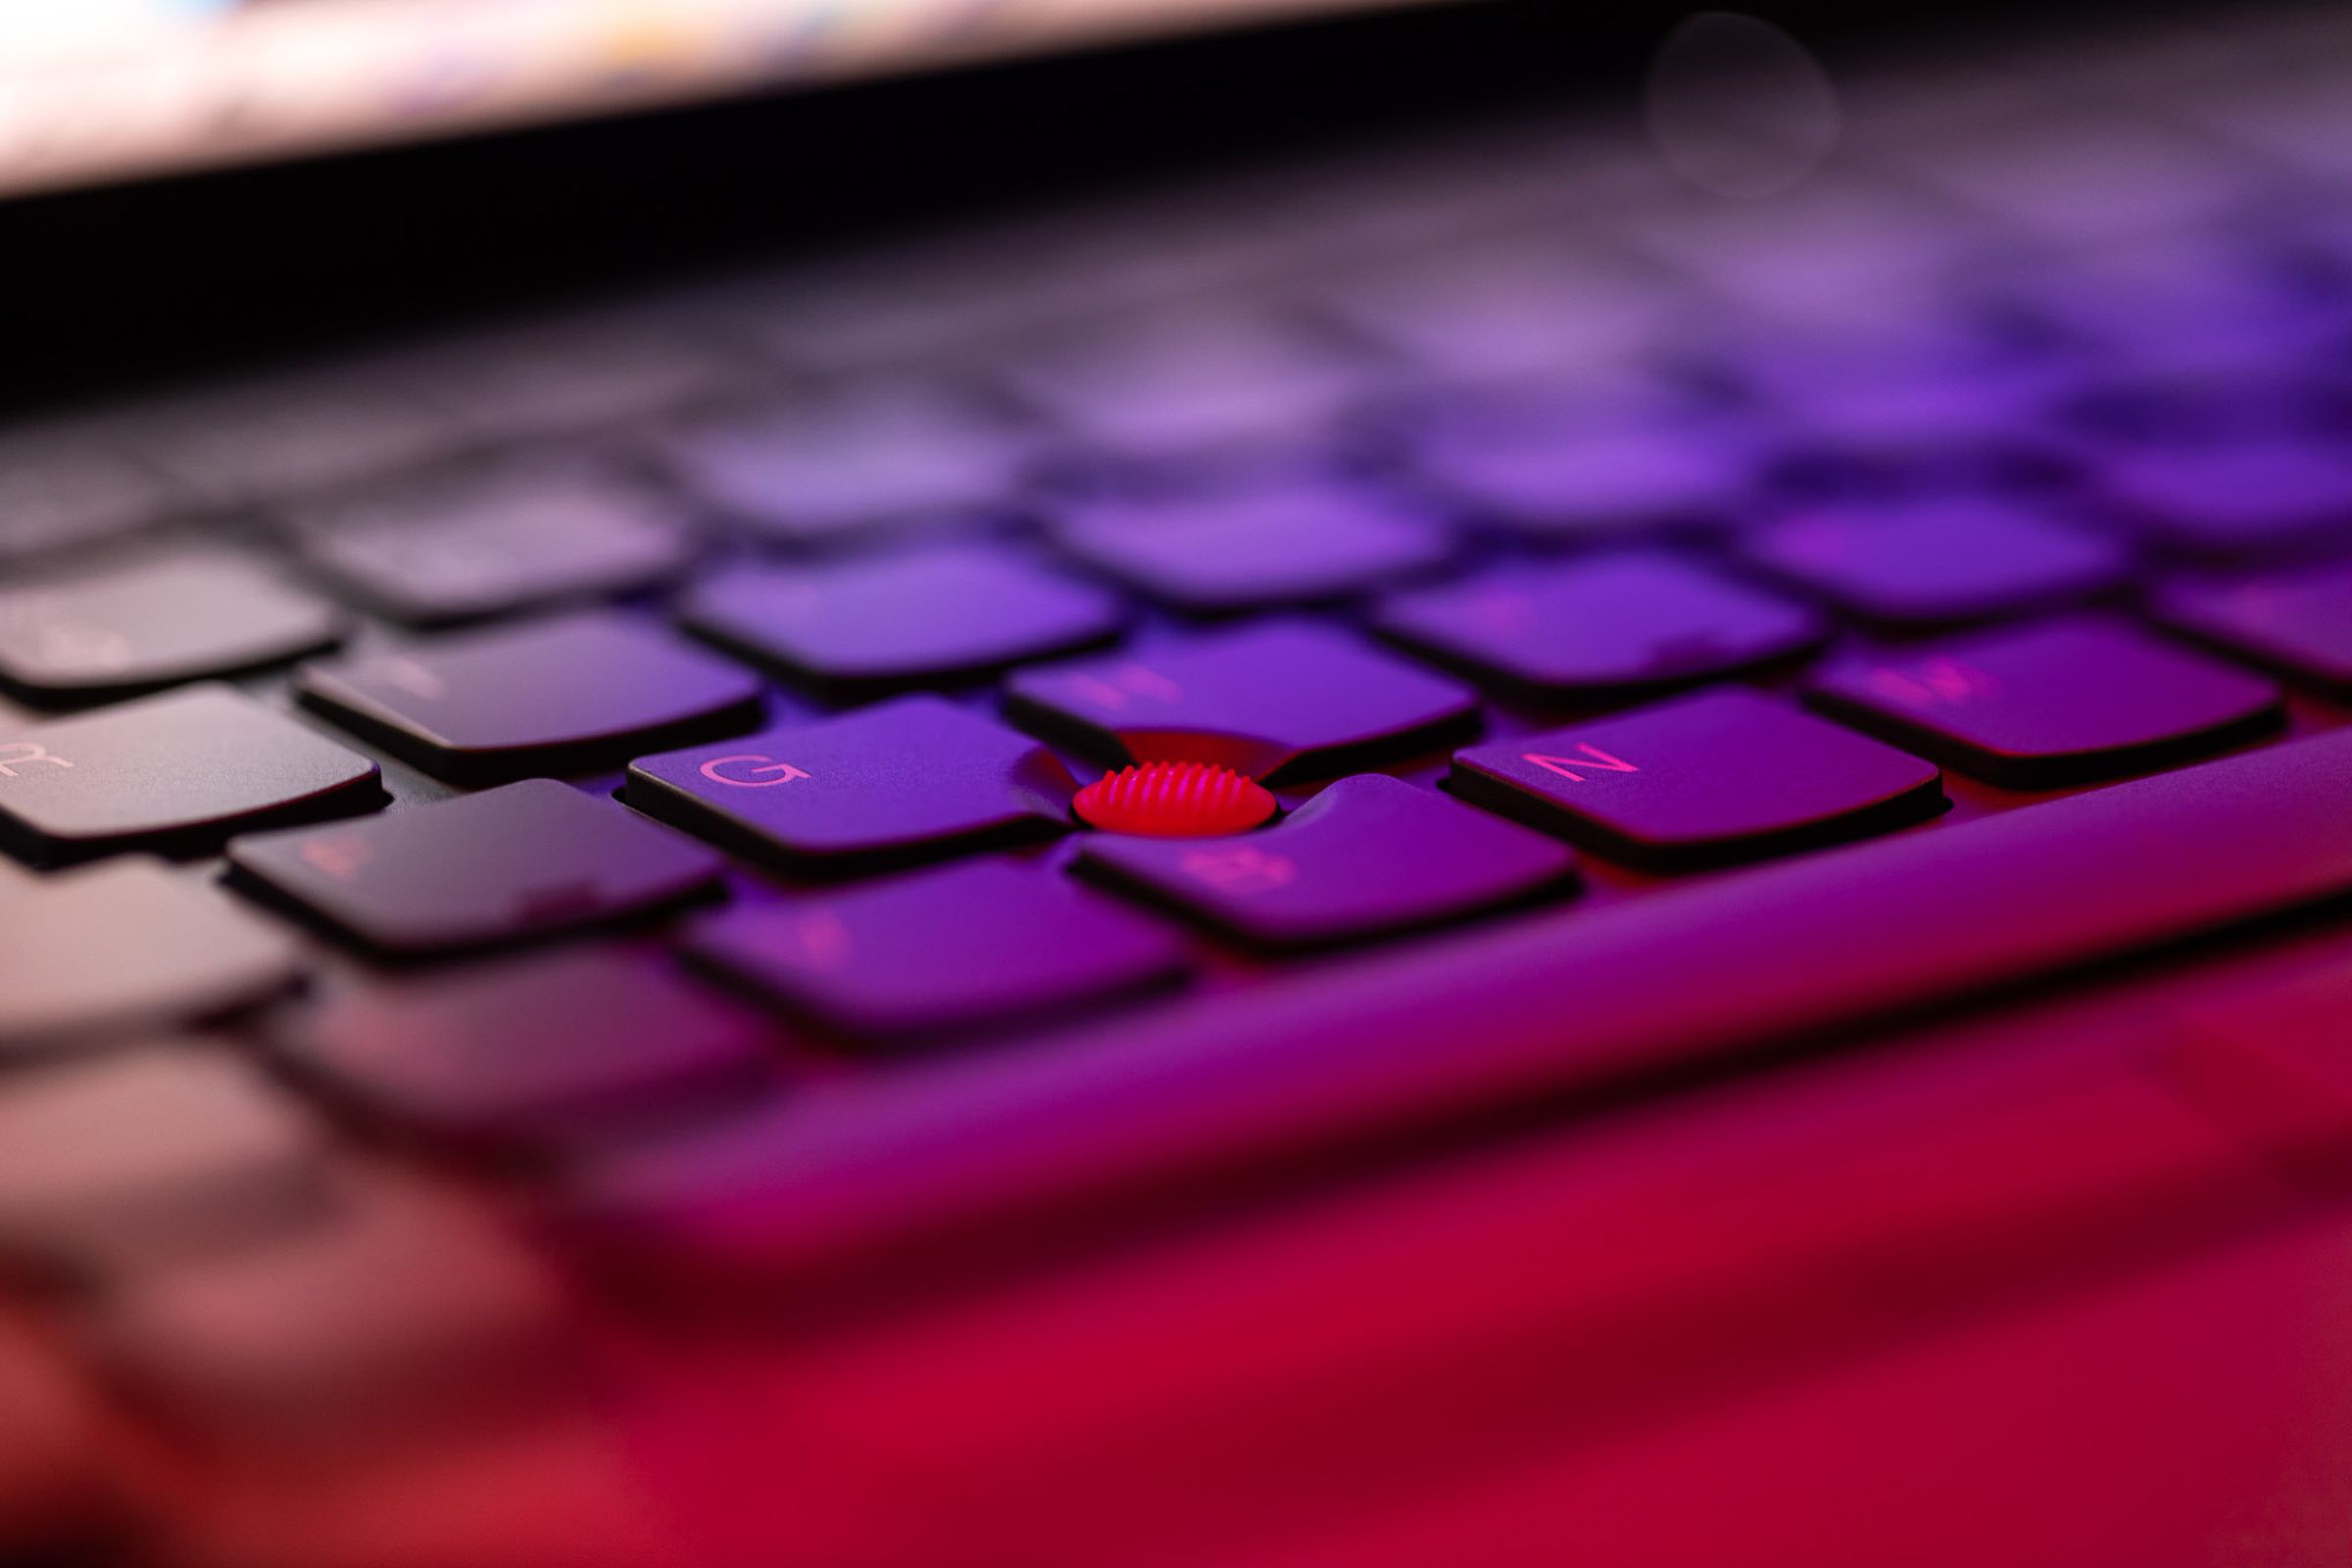 The trackpoint on the Lenovo ThinkPad X1 Yoga Gen 7.